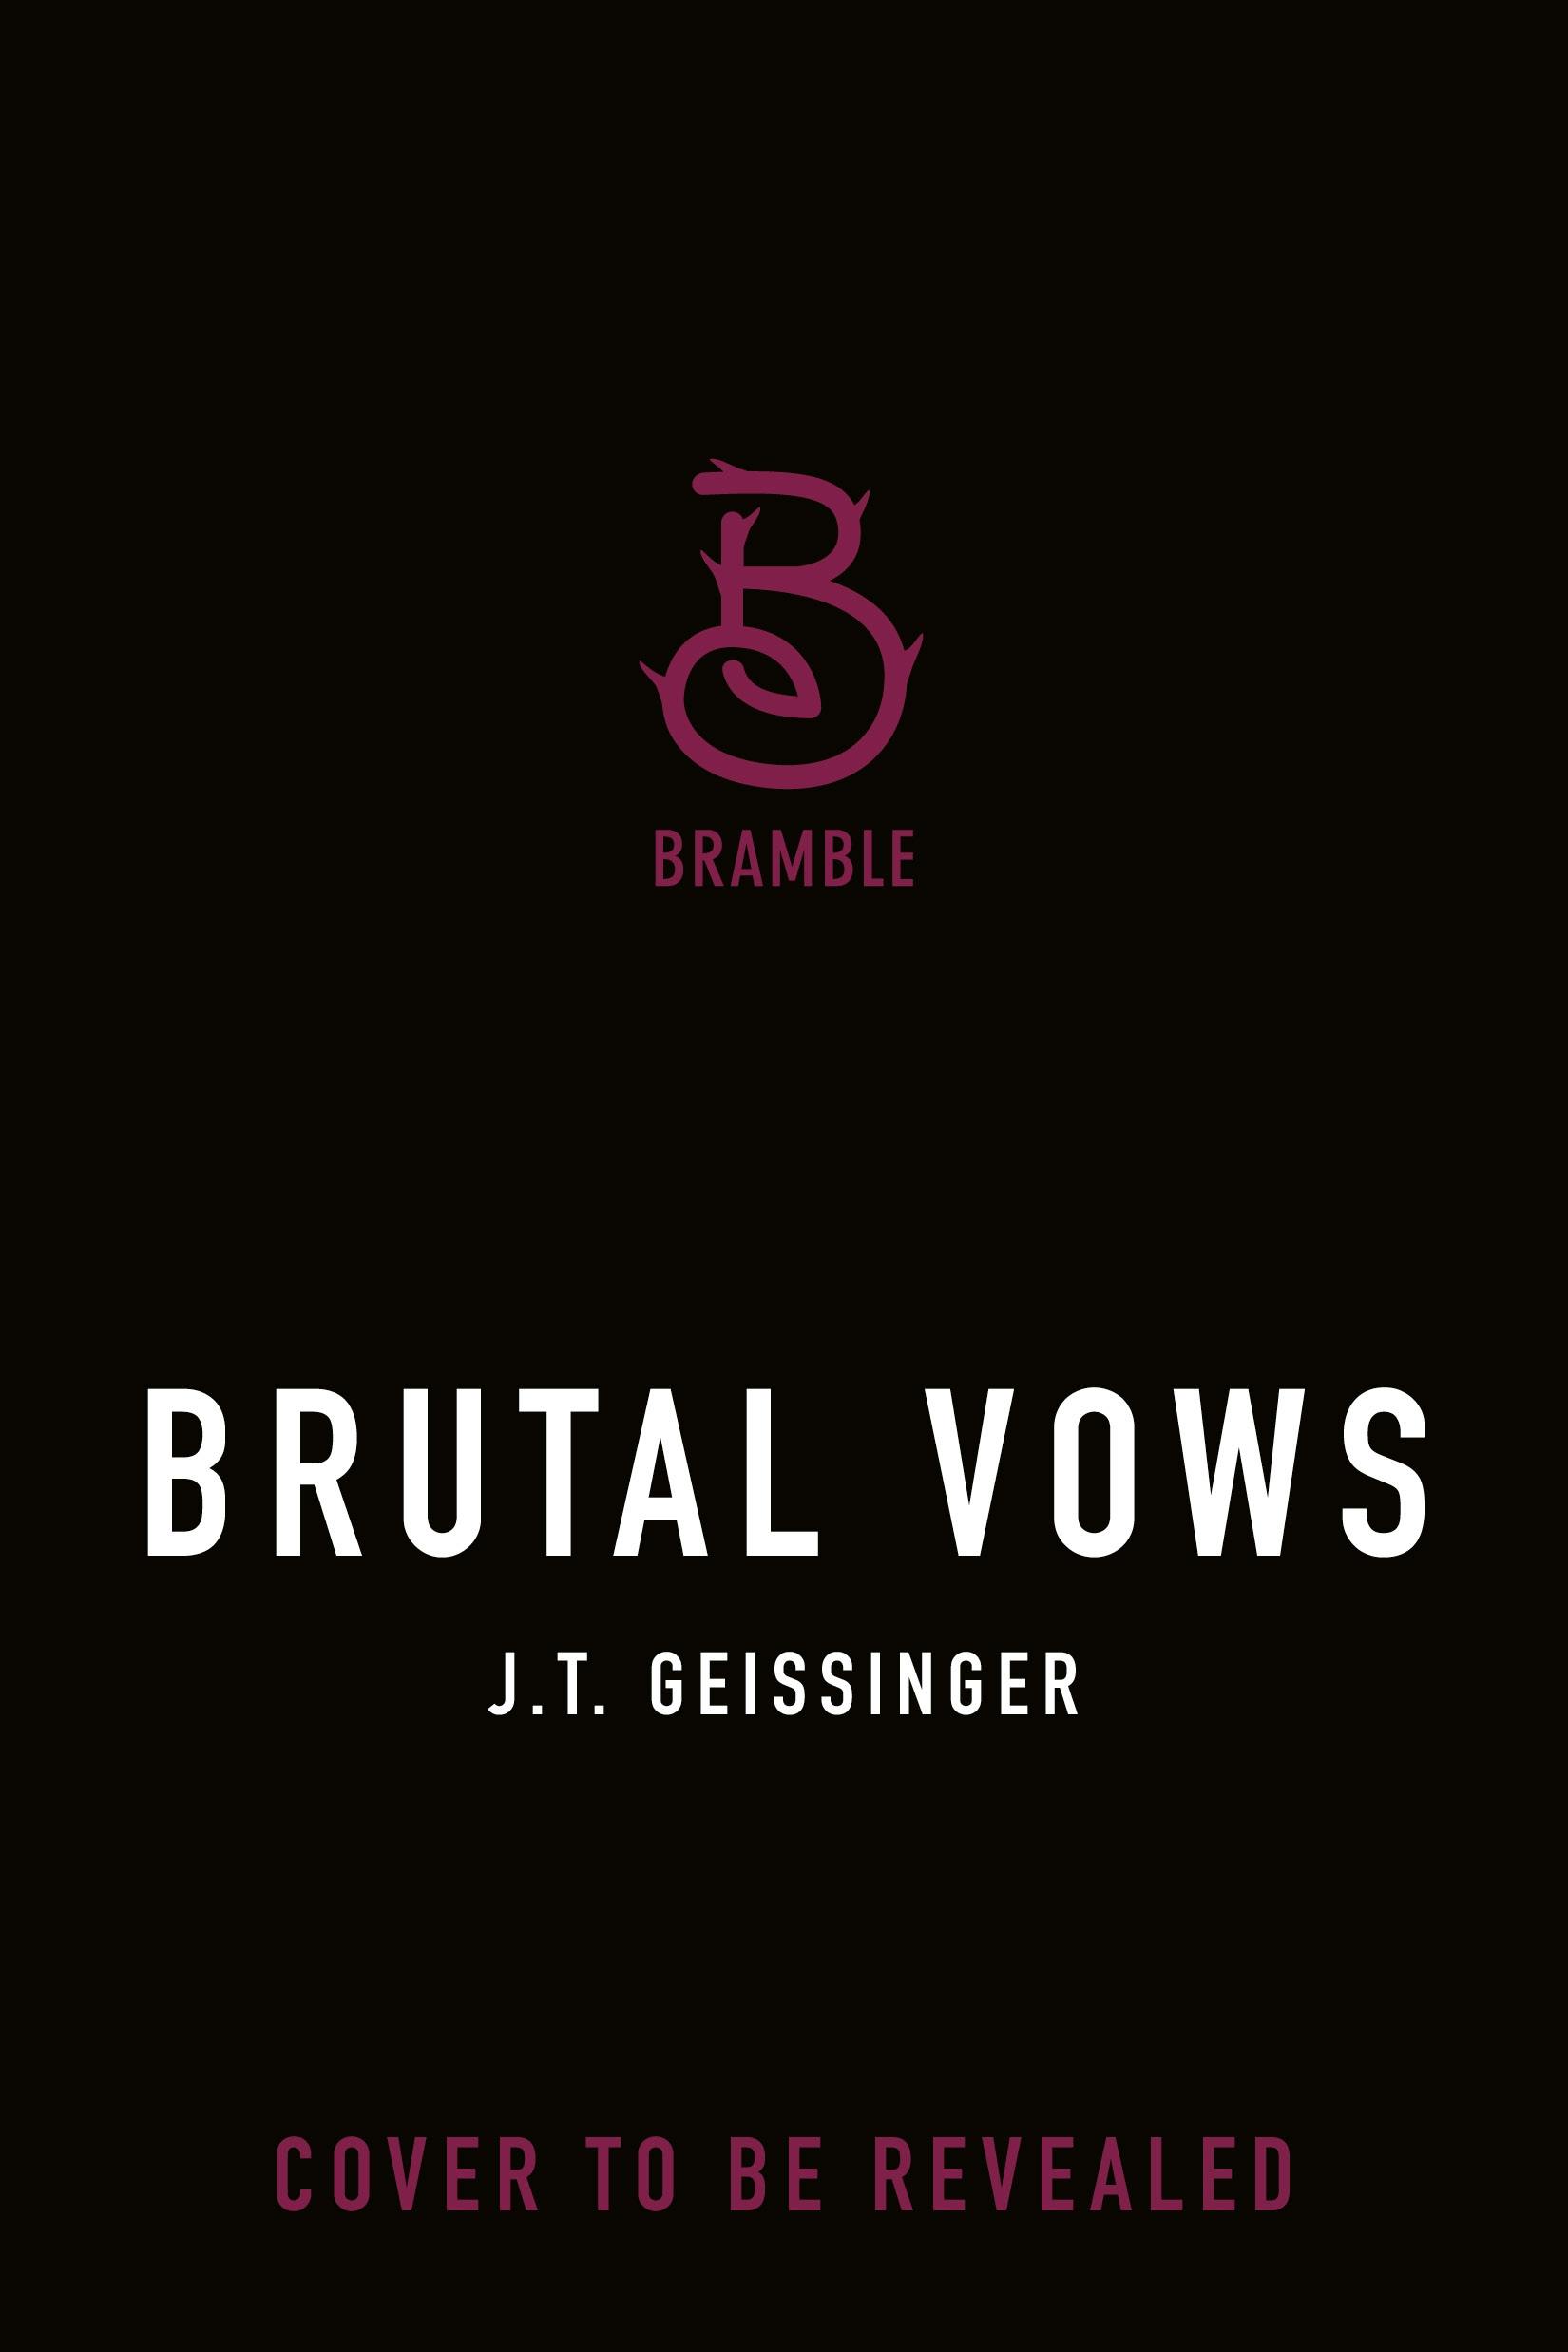 Cover for the book titled as: Brutal Vows